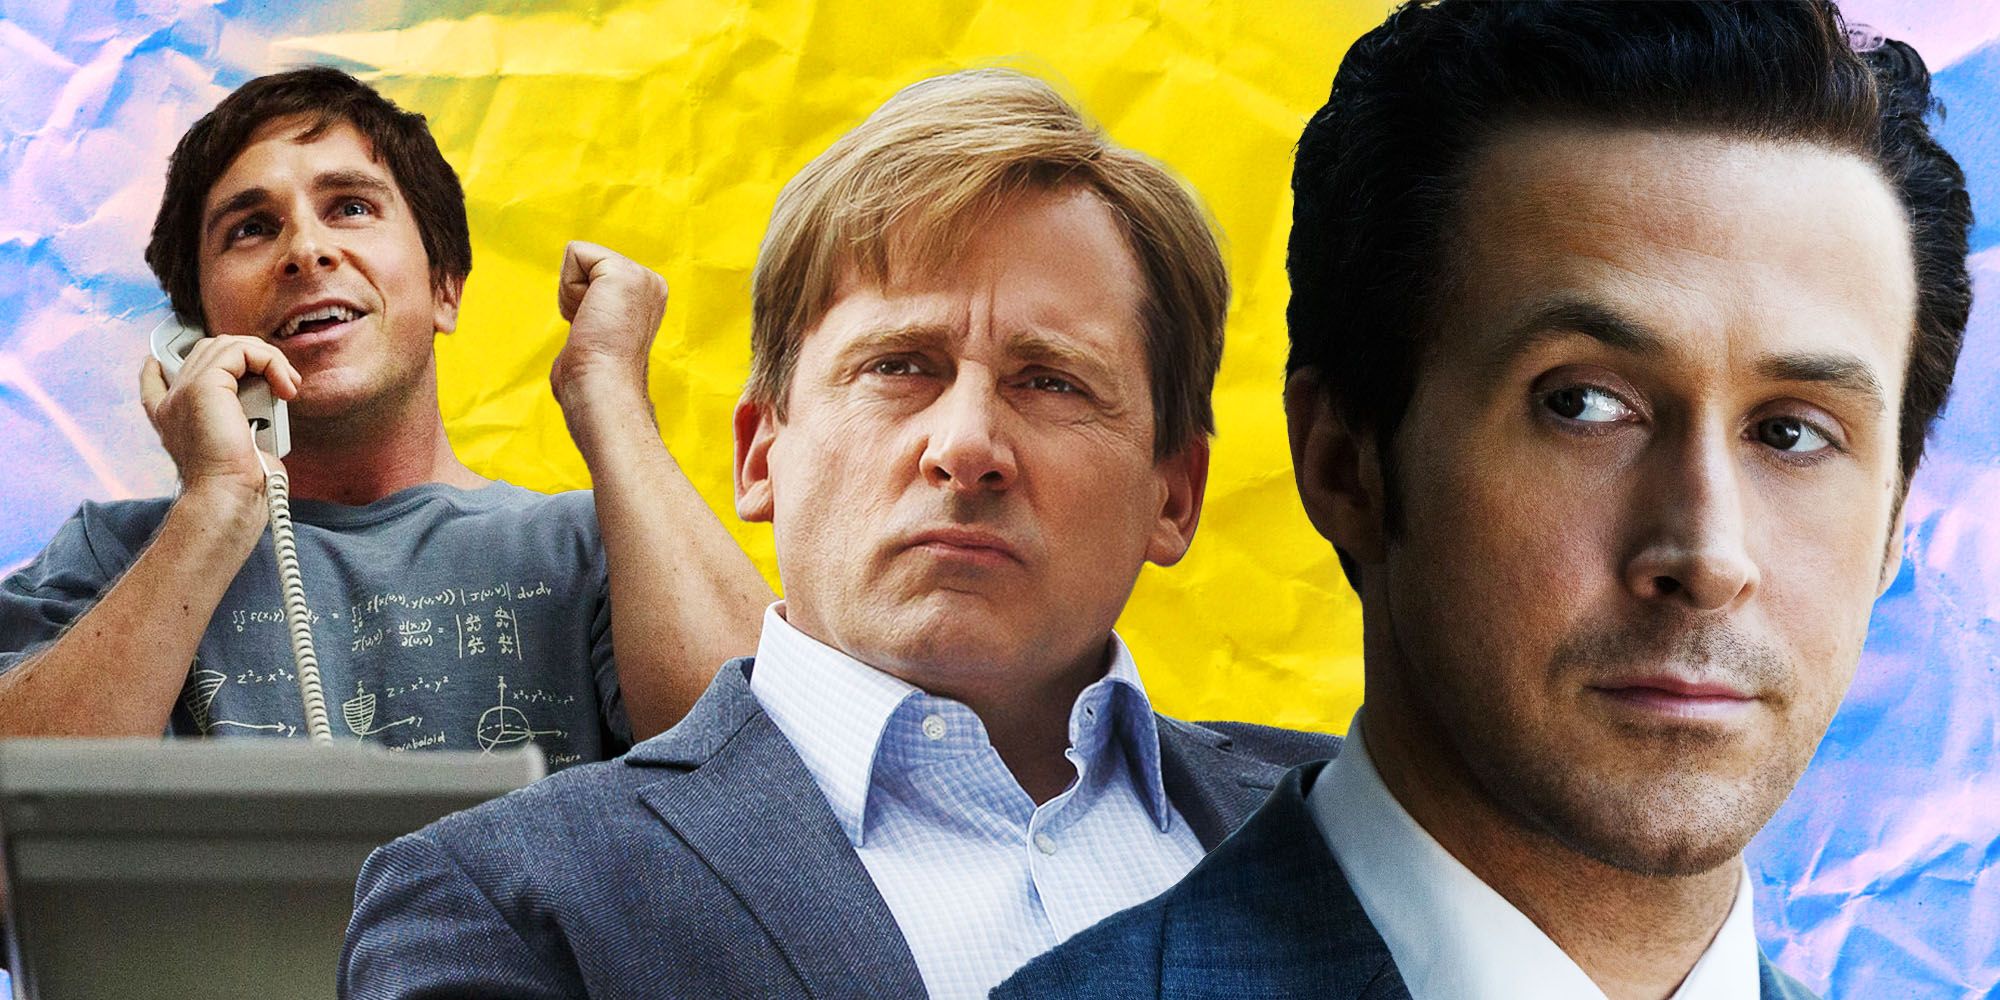 A collage of Christian Bale, Steve Carell, and Ryan Gosling in The Big Short - created by Screen Rant Image Editors